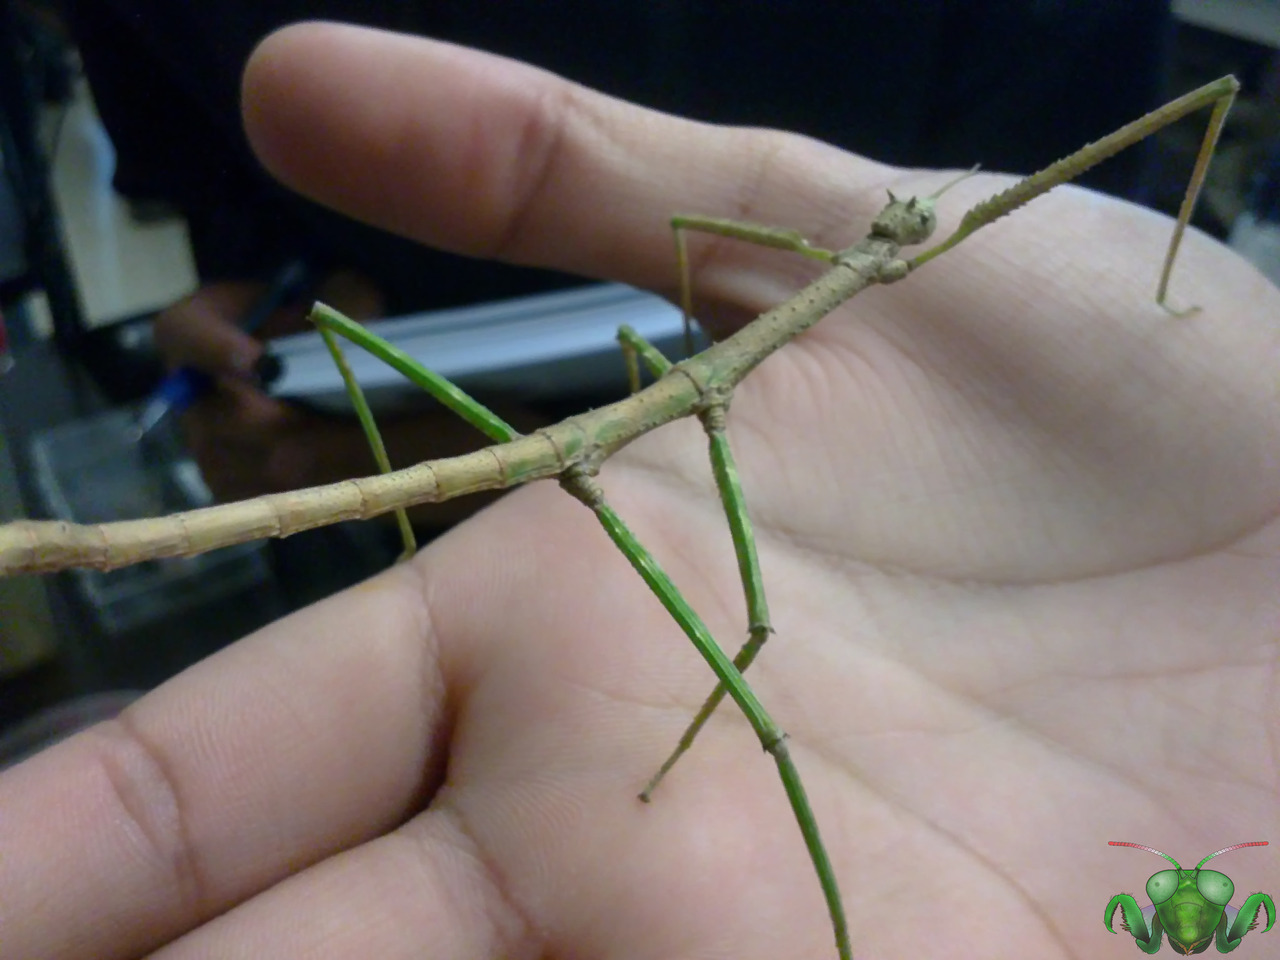 Annam Walking Stick - Medauroidea extradentataAlso called the “Vietnamese Walking Stick”, this is the last live insect specimen I have from my time as an undergrad at the University of Toronto. Had to really look around to identify this insect, and...